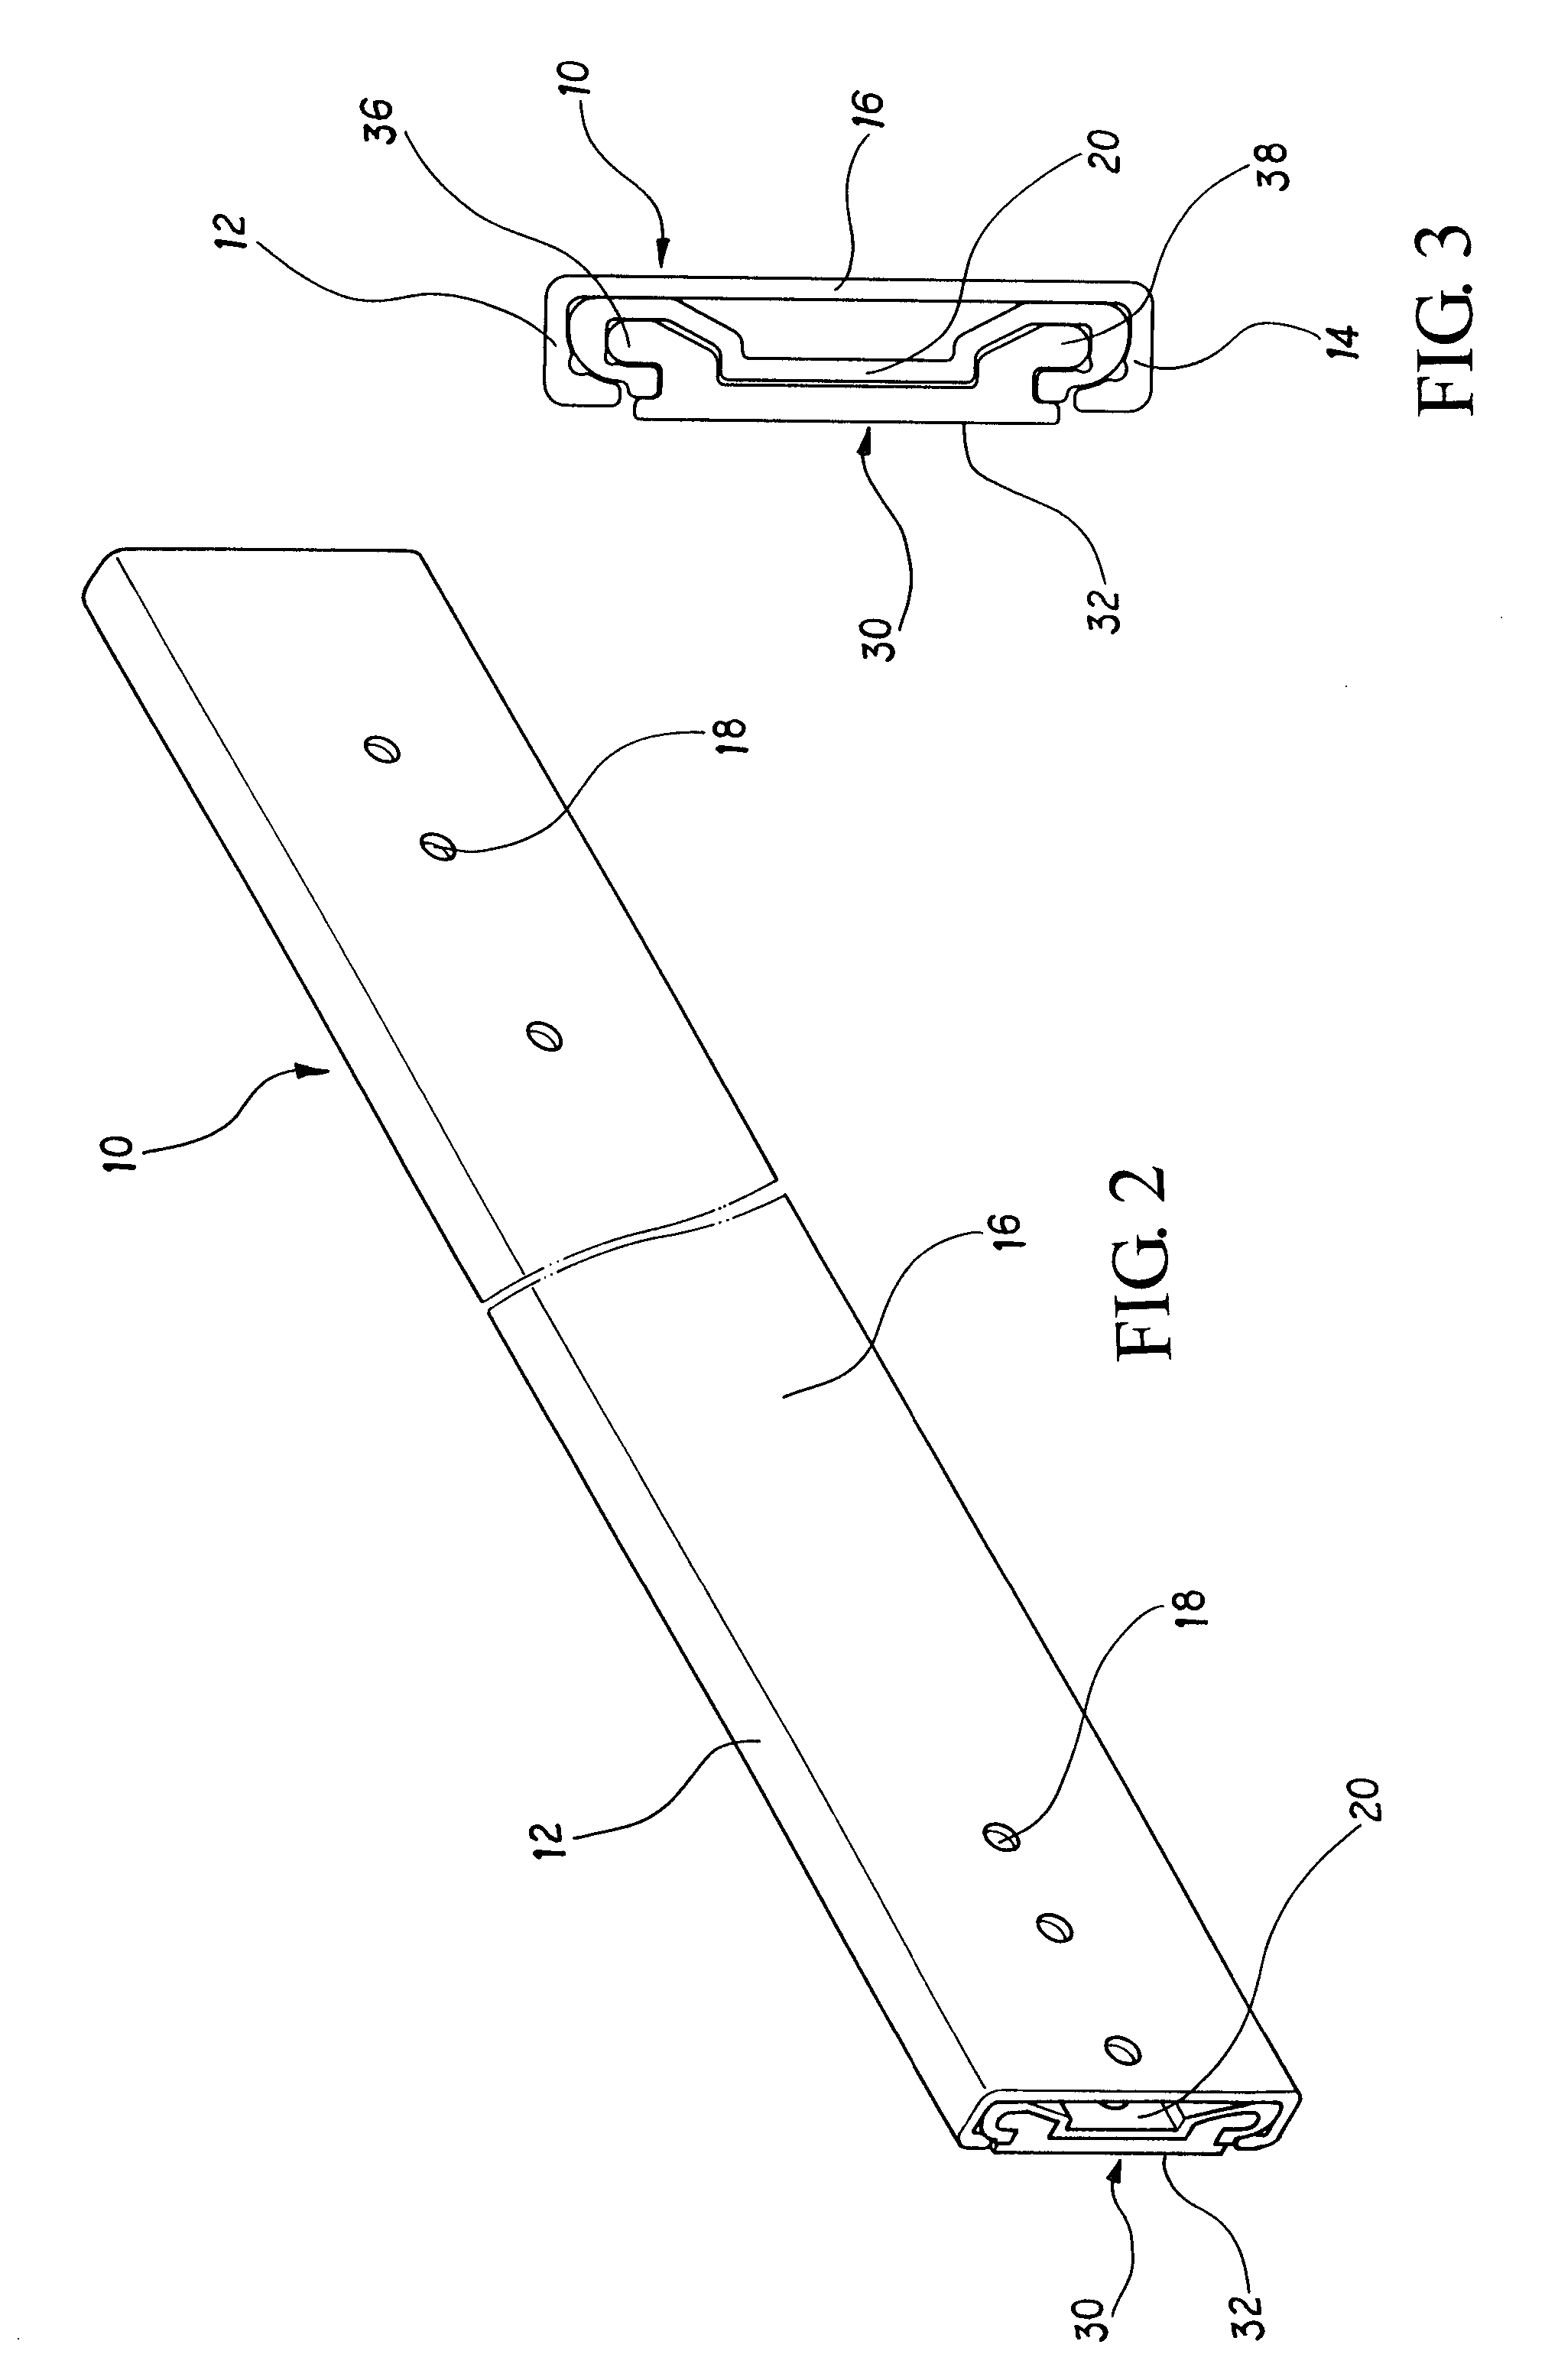 Three-sectional rail structure